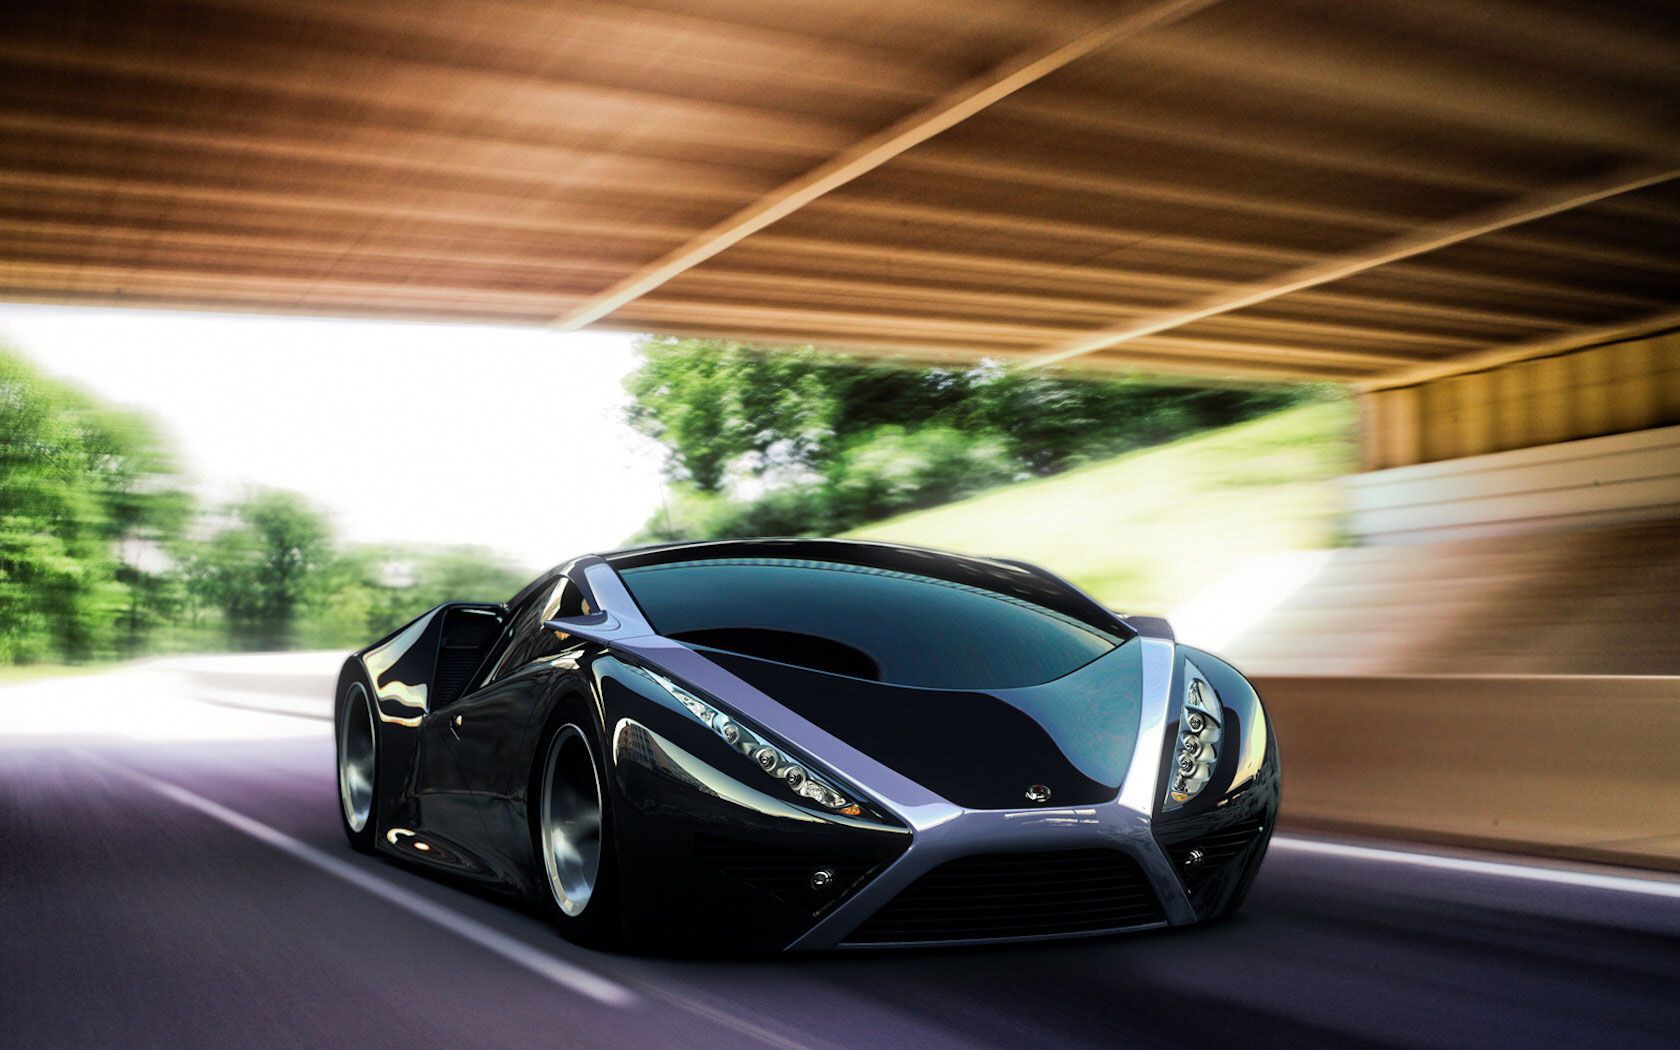 All Cars Wallpapers Tuned Car Wallpaper - Cars Backgrounds & Cars ...